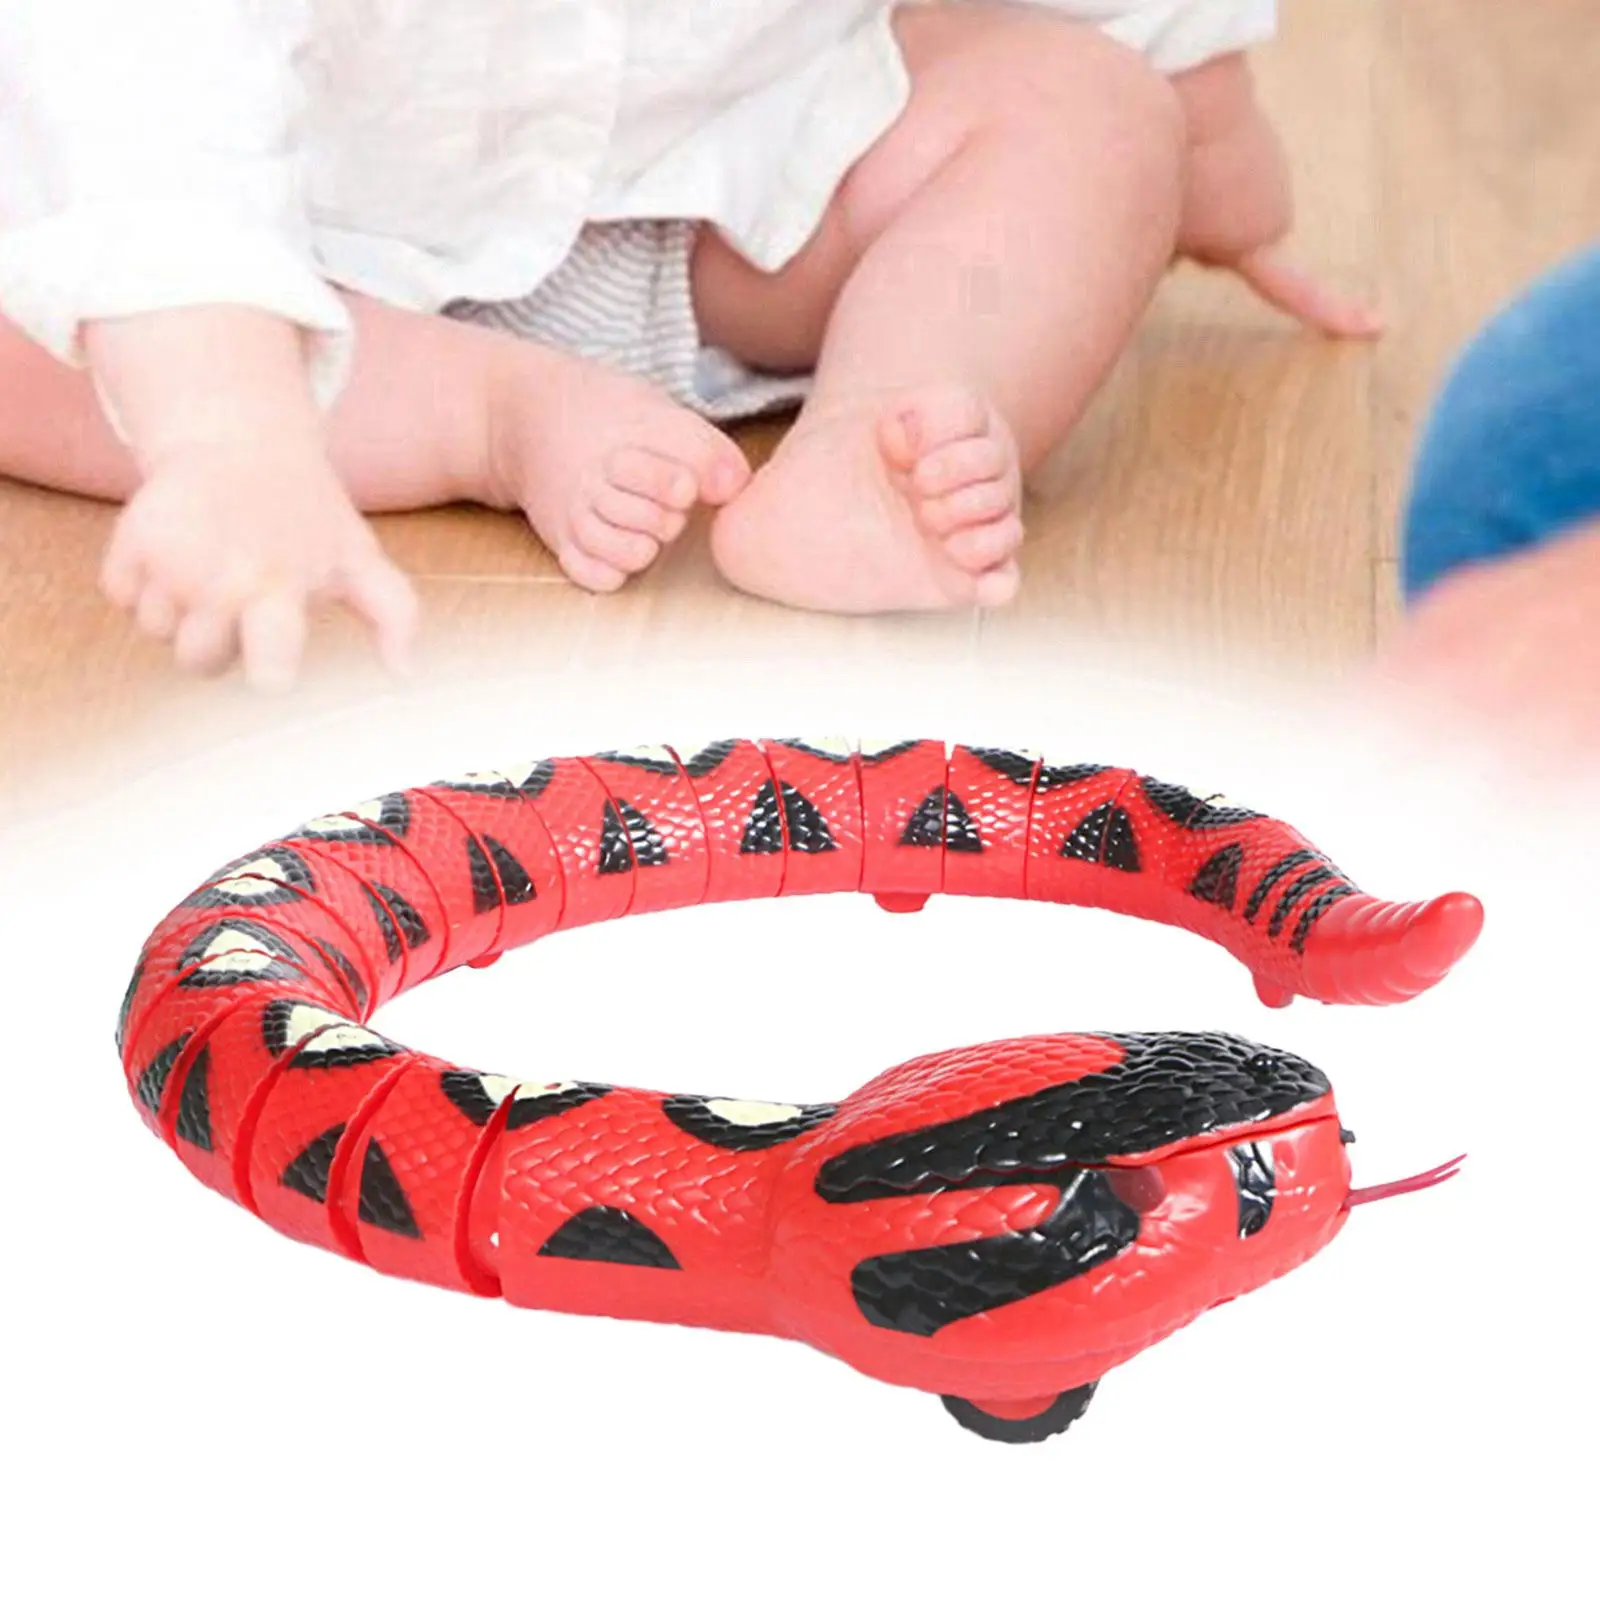 Cat Interactive Toy Crawling Snake Cat Toy Tricky Smart Sensing Snake Toy Electric Snake Toy for Cats Pet Accessories